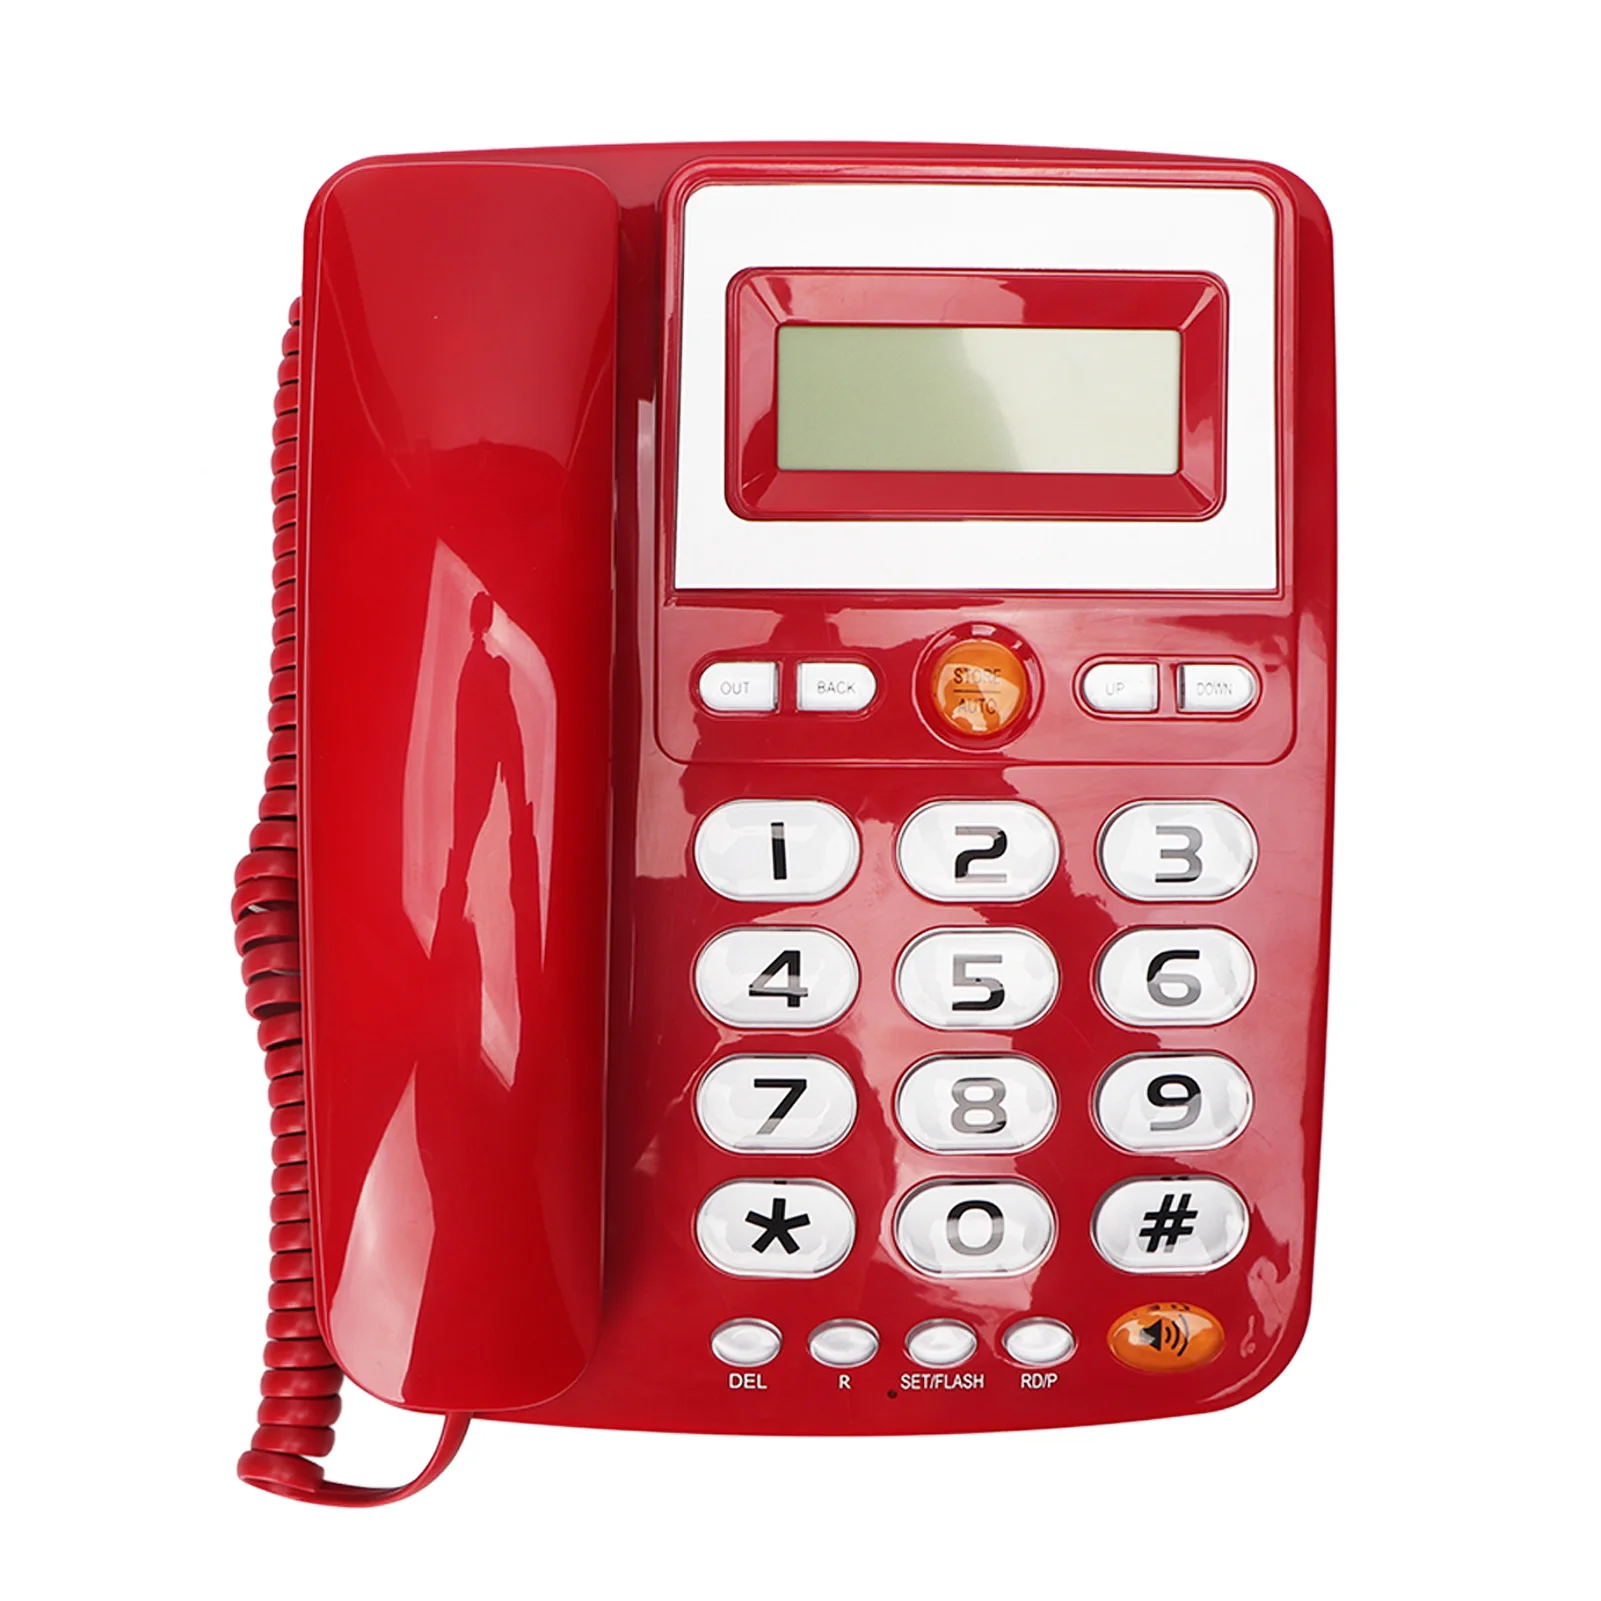 Big Button Landline Phone Hands Free Calling Corded Phone Wired Phone With One-touch Dialing And Caller ID Display Function